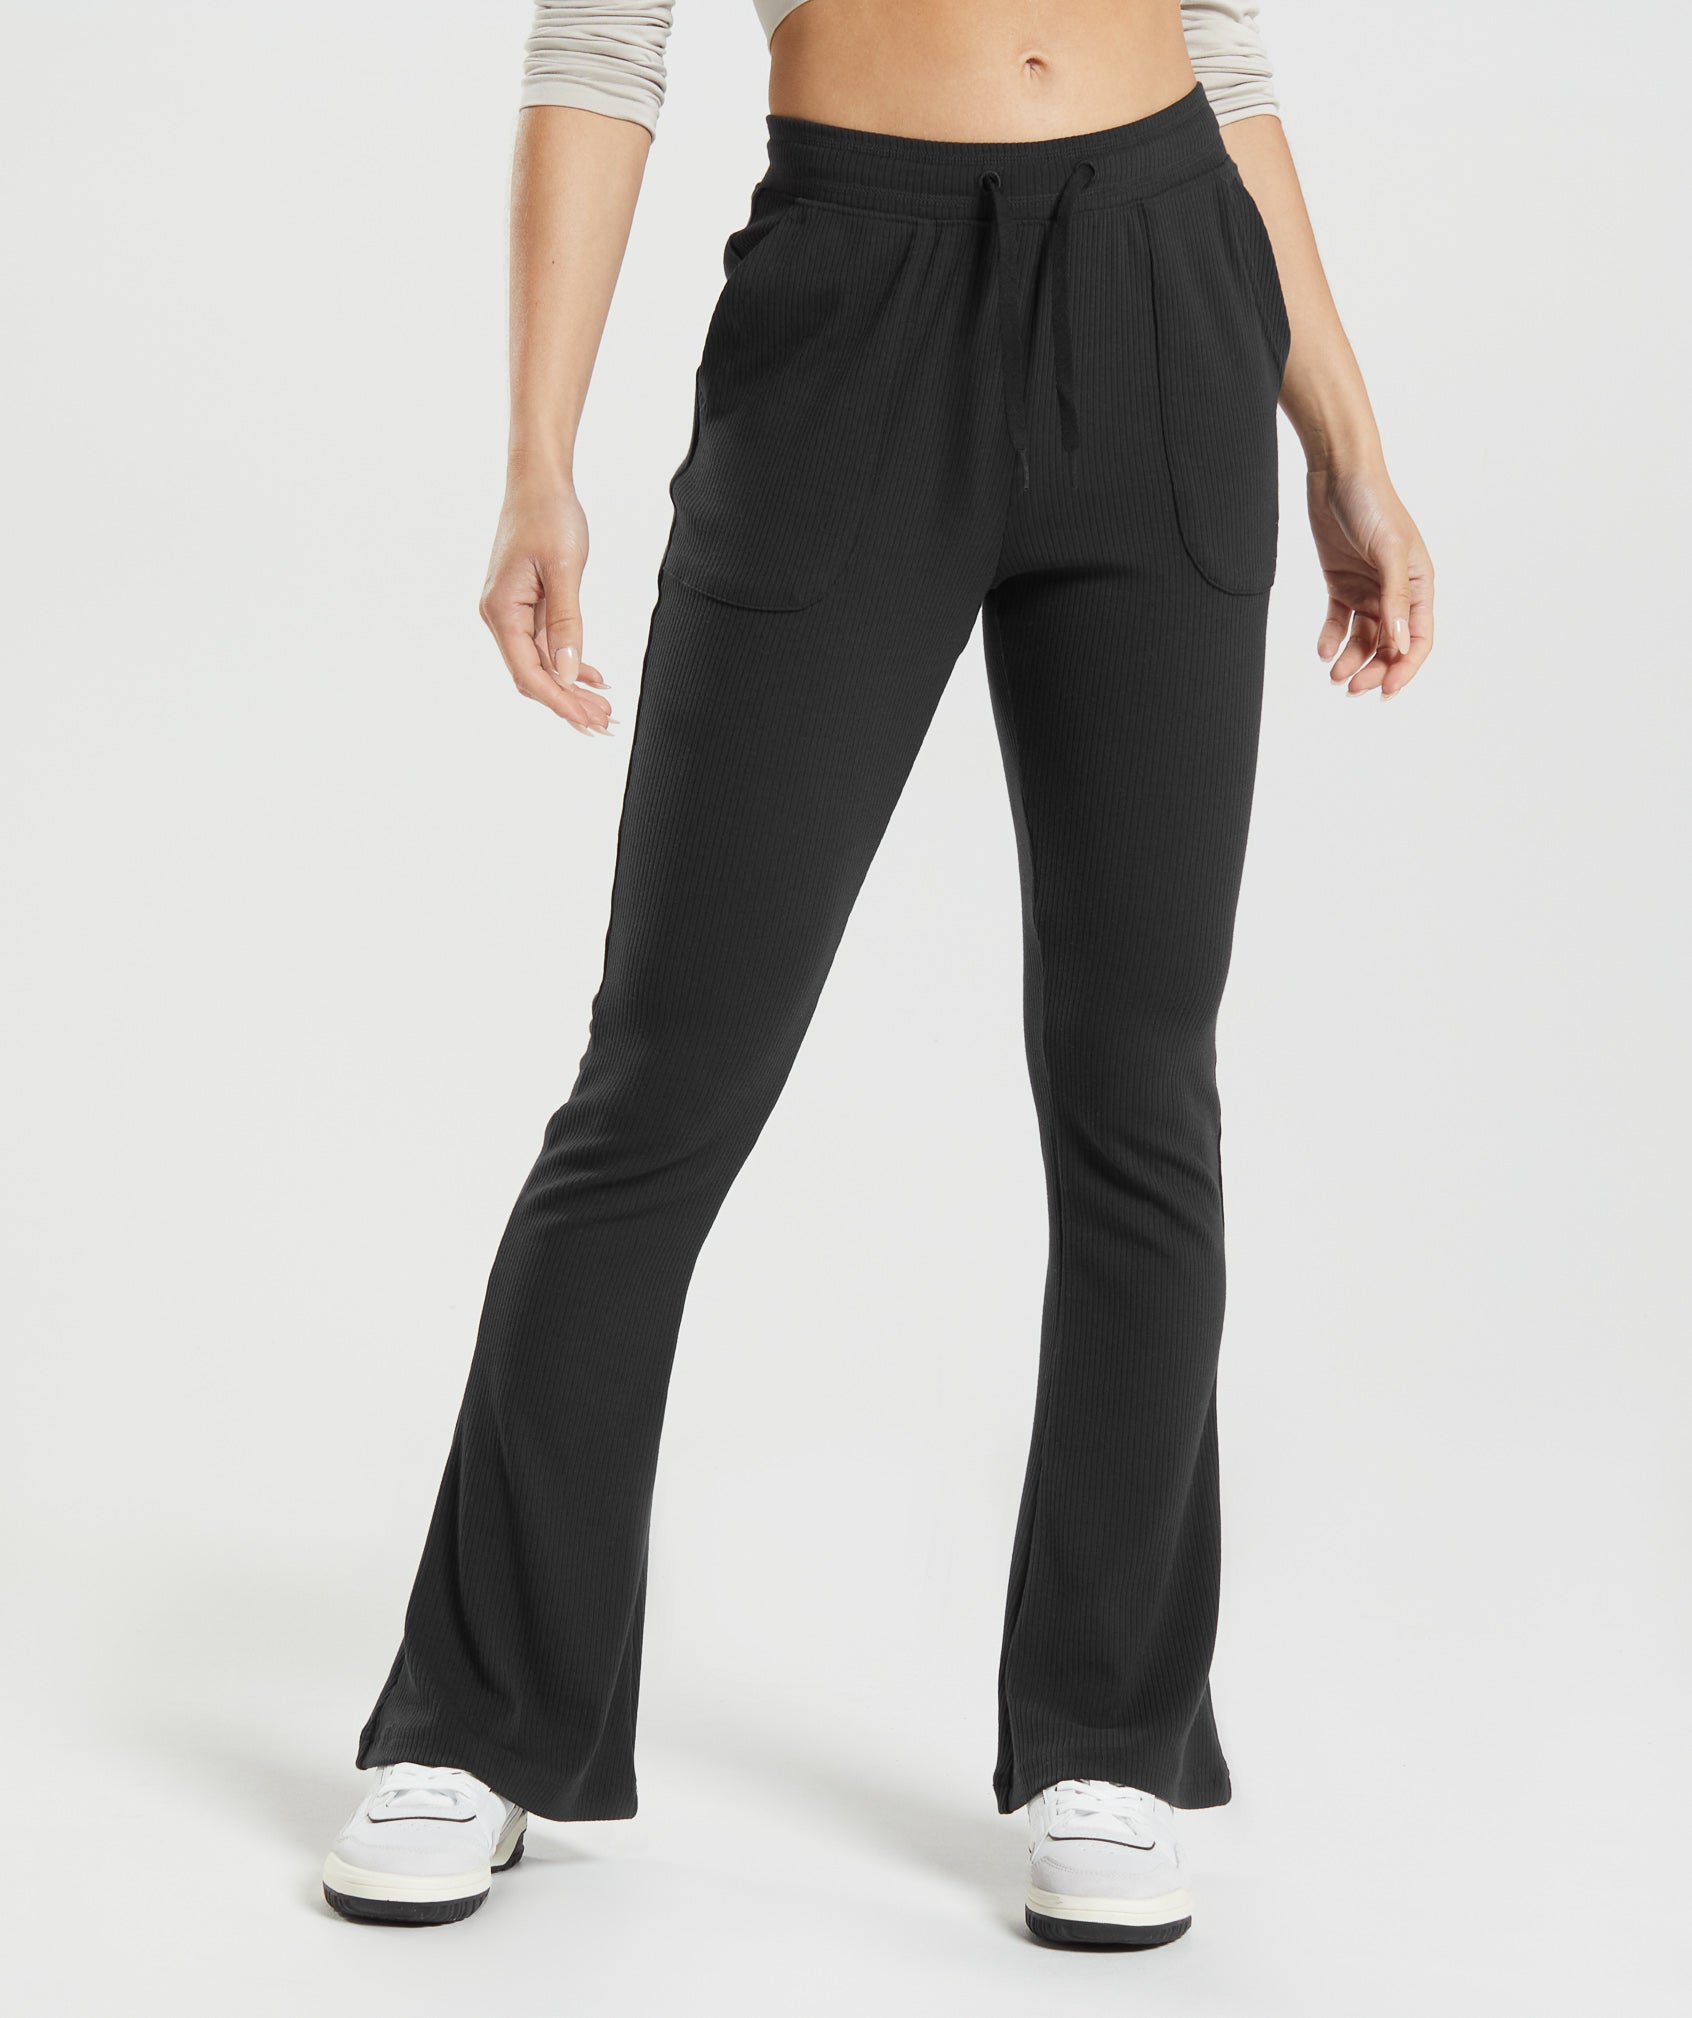 Pause Flared Pants in Black - view 1